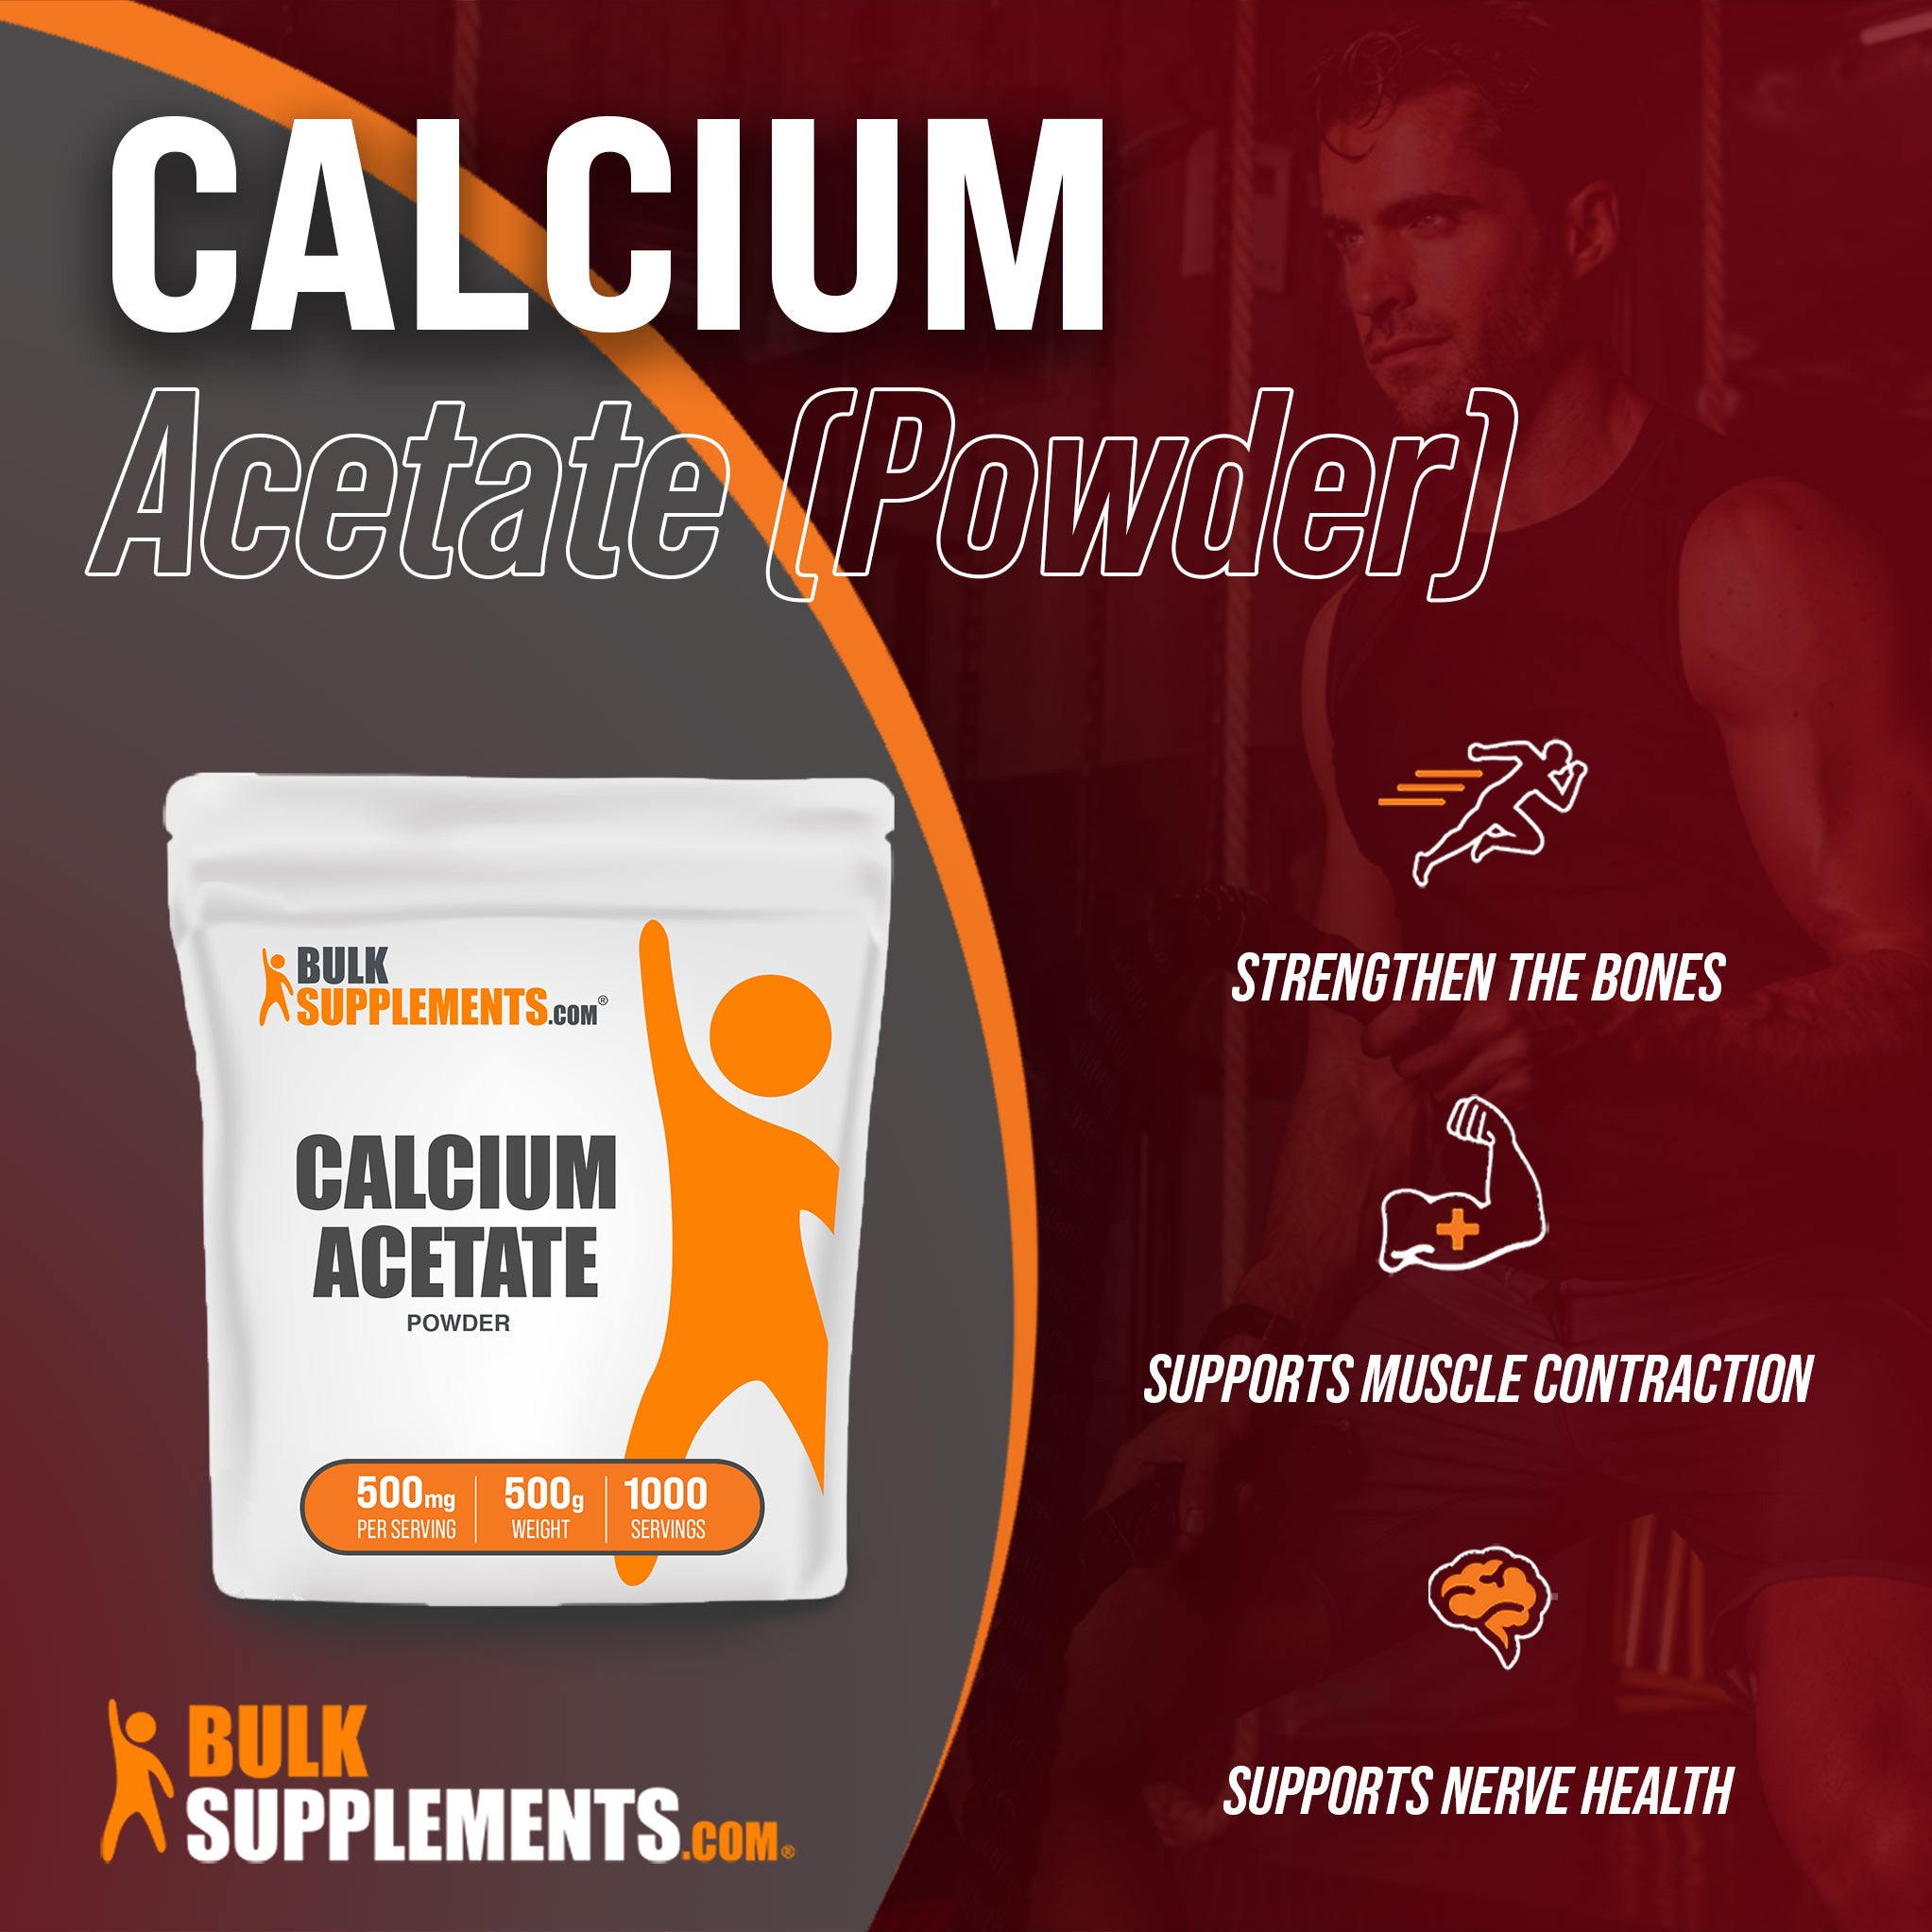 Benefits of our 500g Calcium Supplement; strengthens the bones, supports muscle contraction, supports nerve health